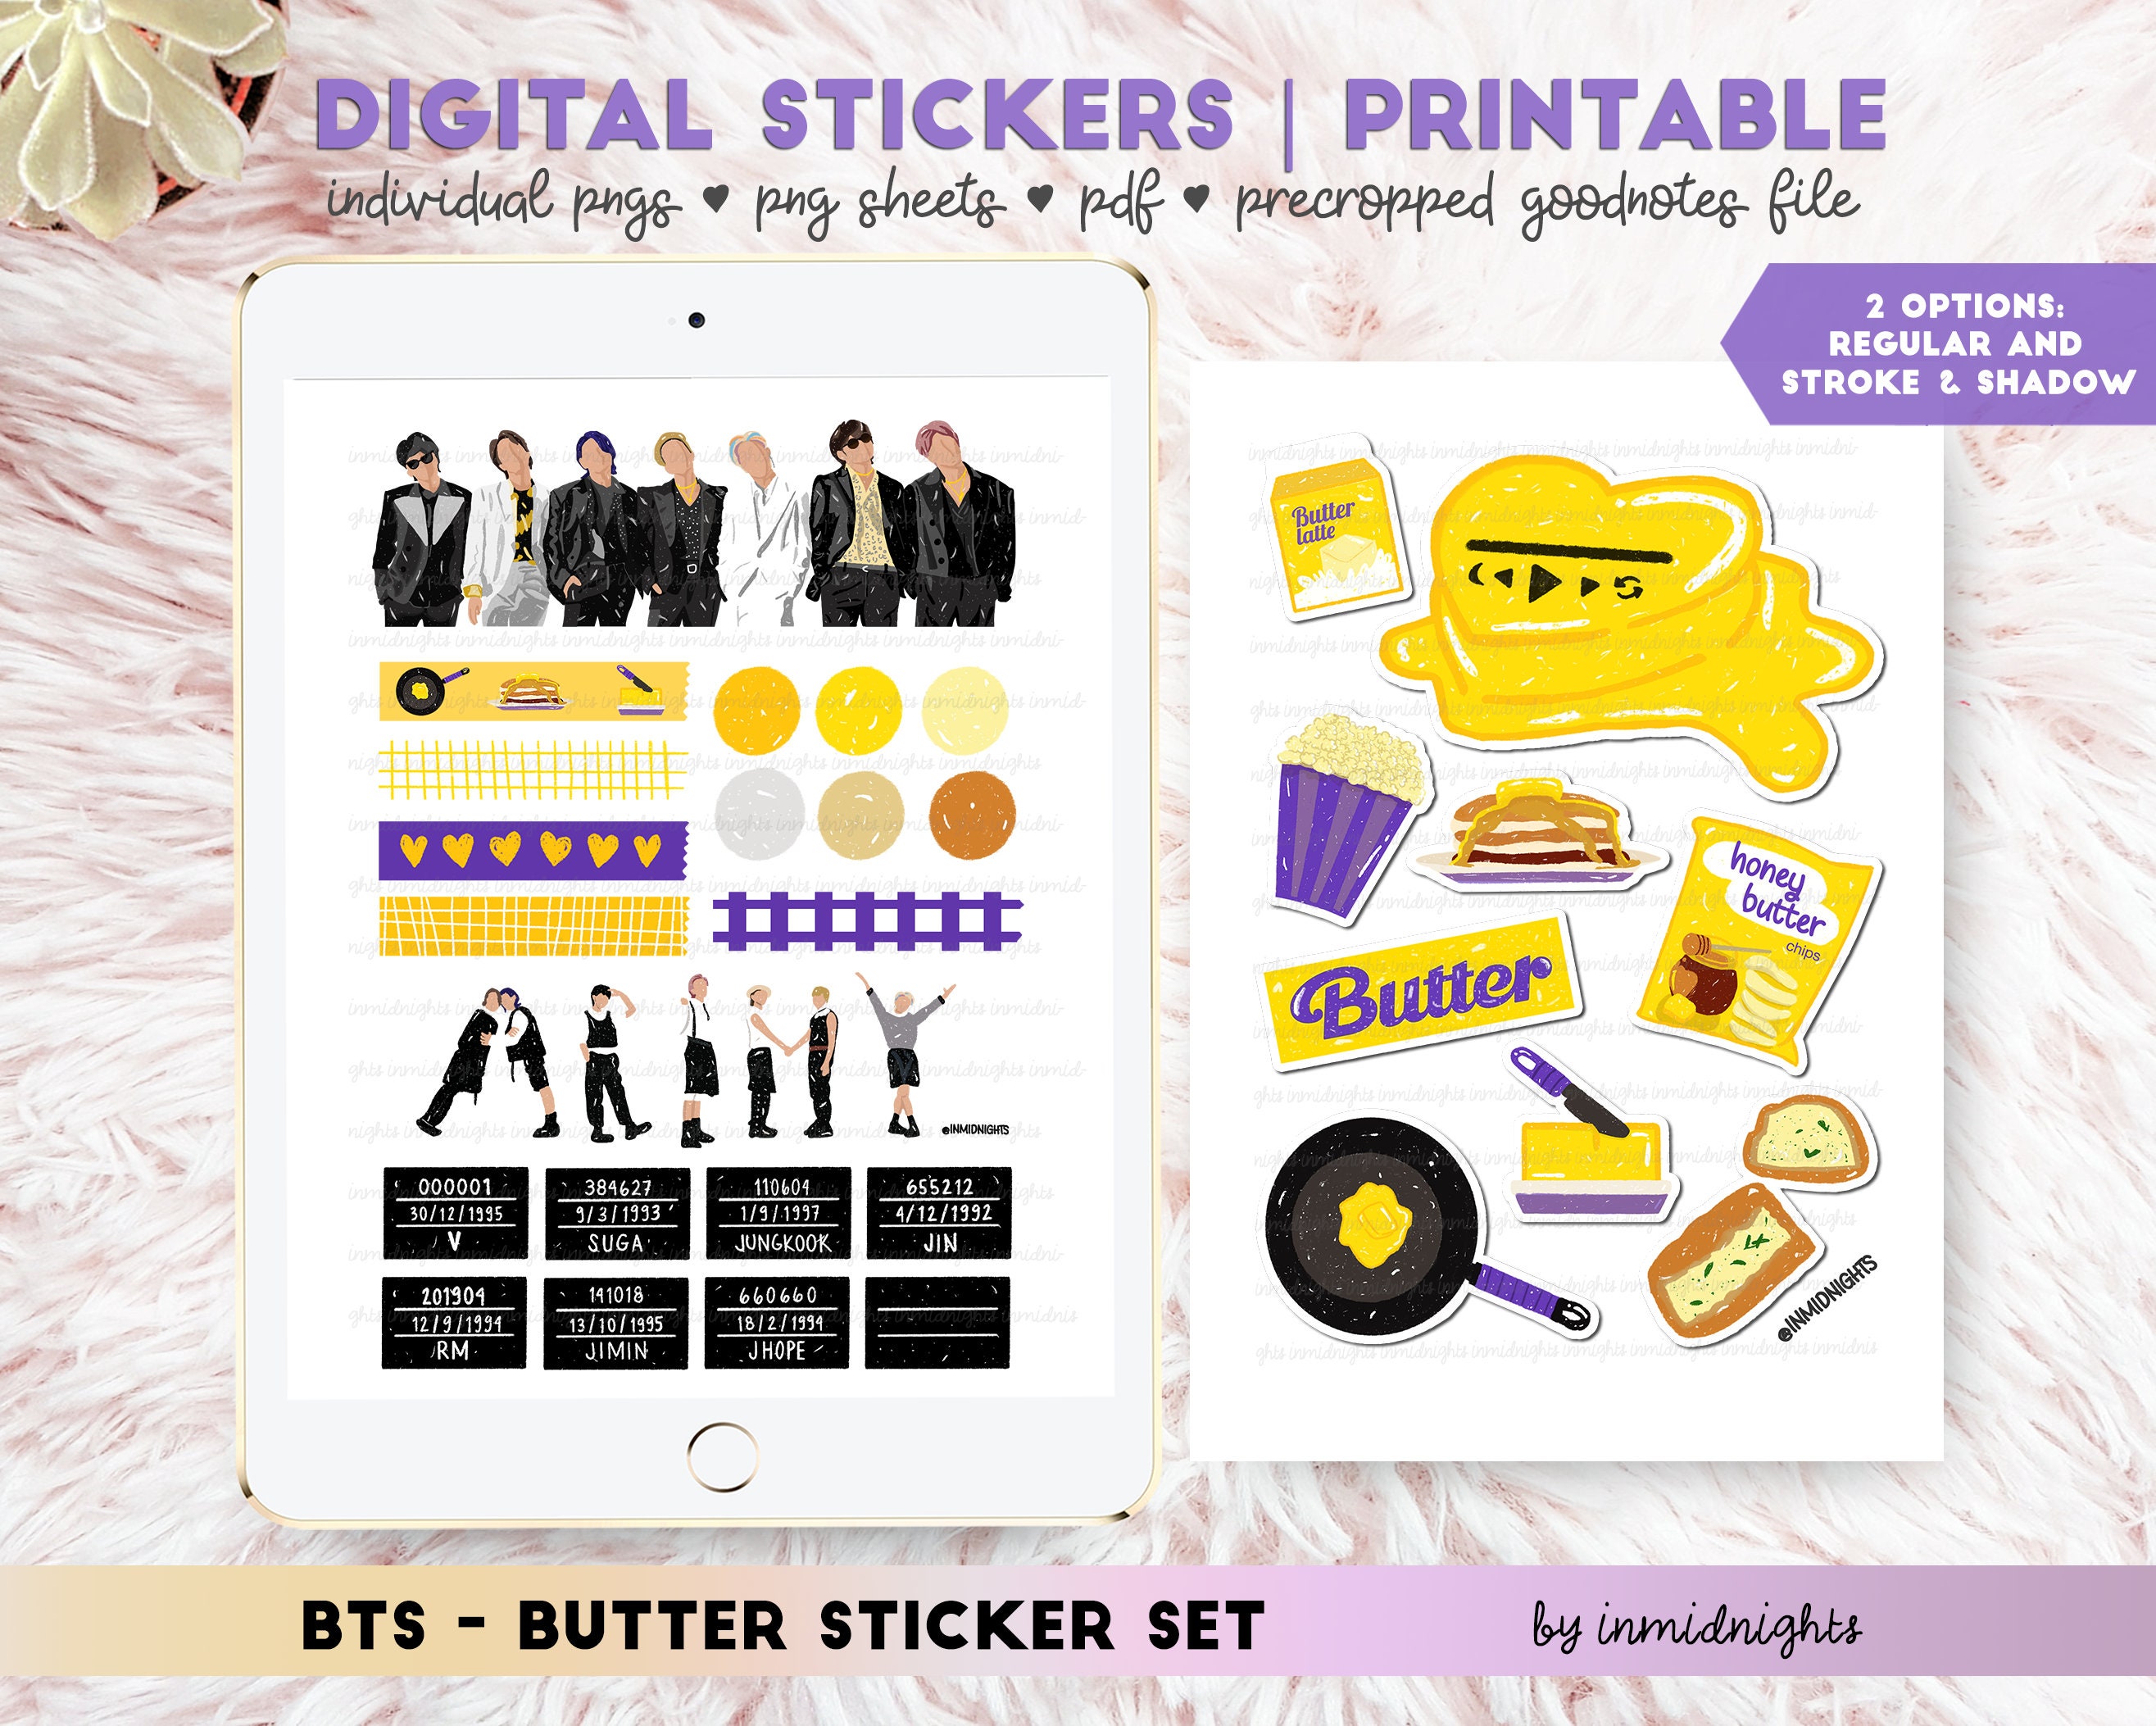 Hangul Lettering Stickers Printable Stickers Precropped Stickers Korean Digital Stickers for iPad BTS Sticker